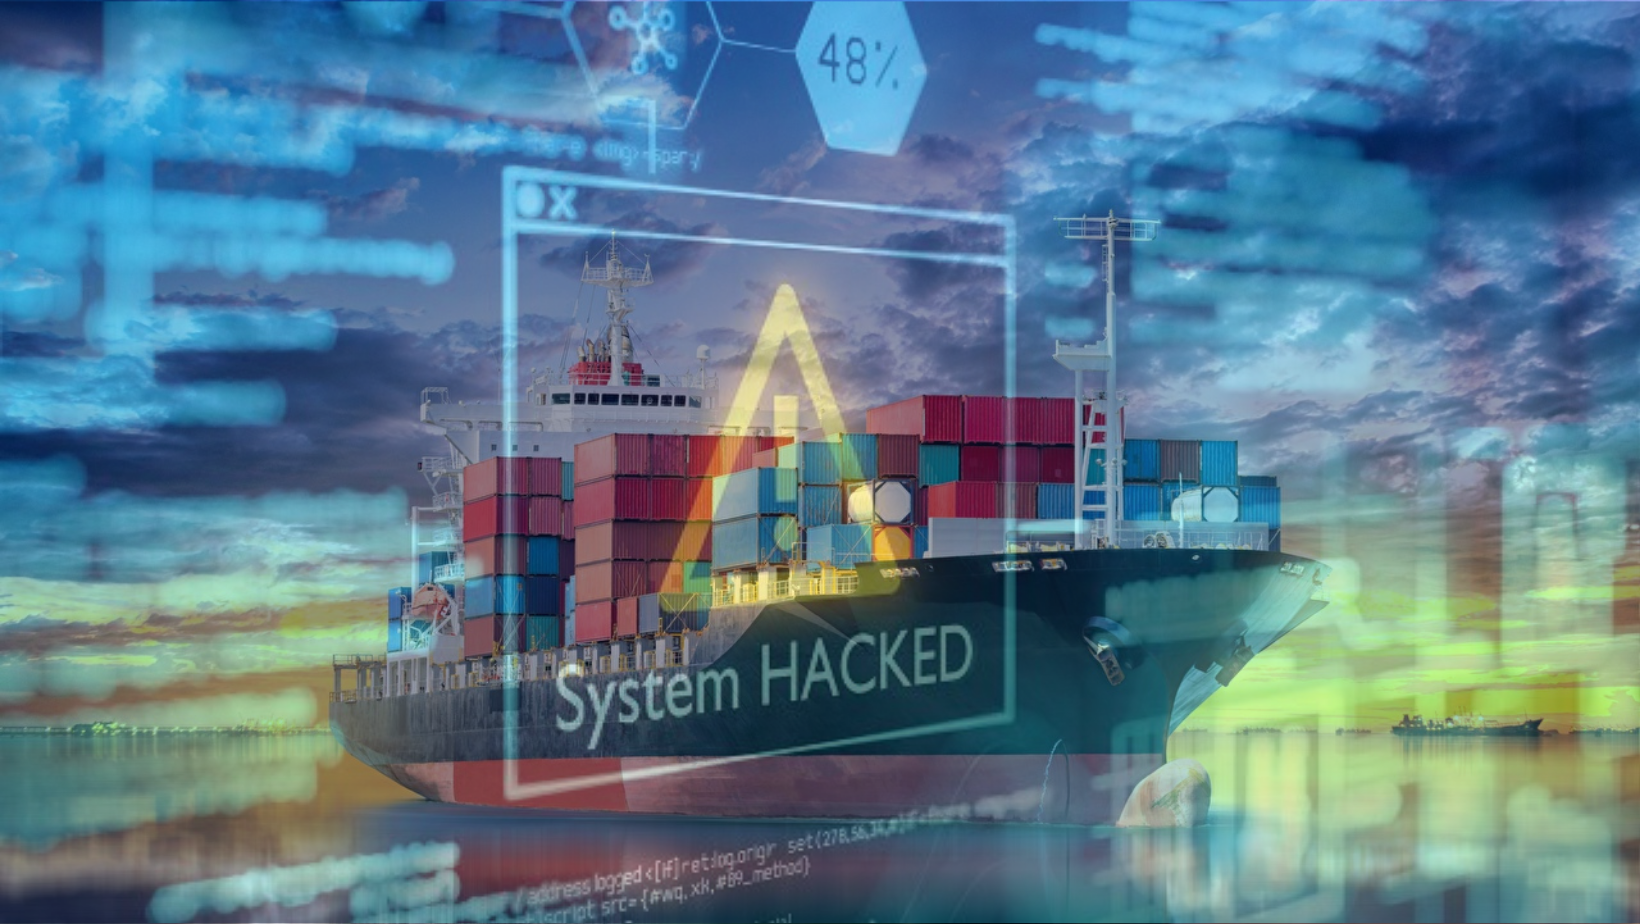 cyber attacks on ships